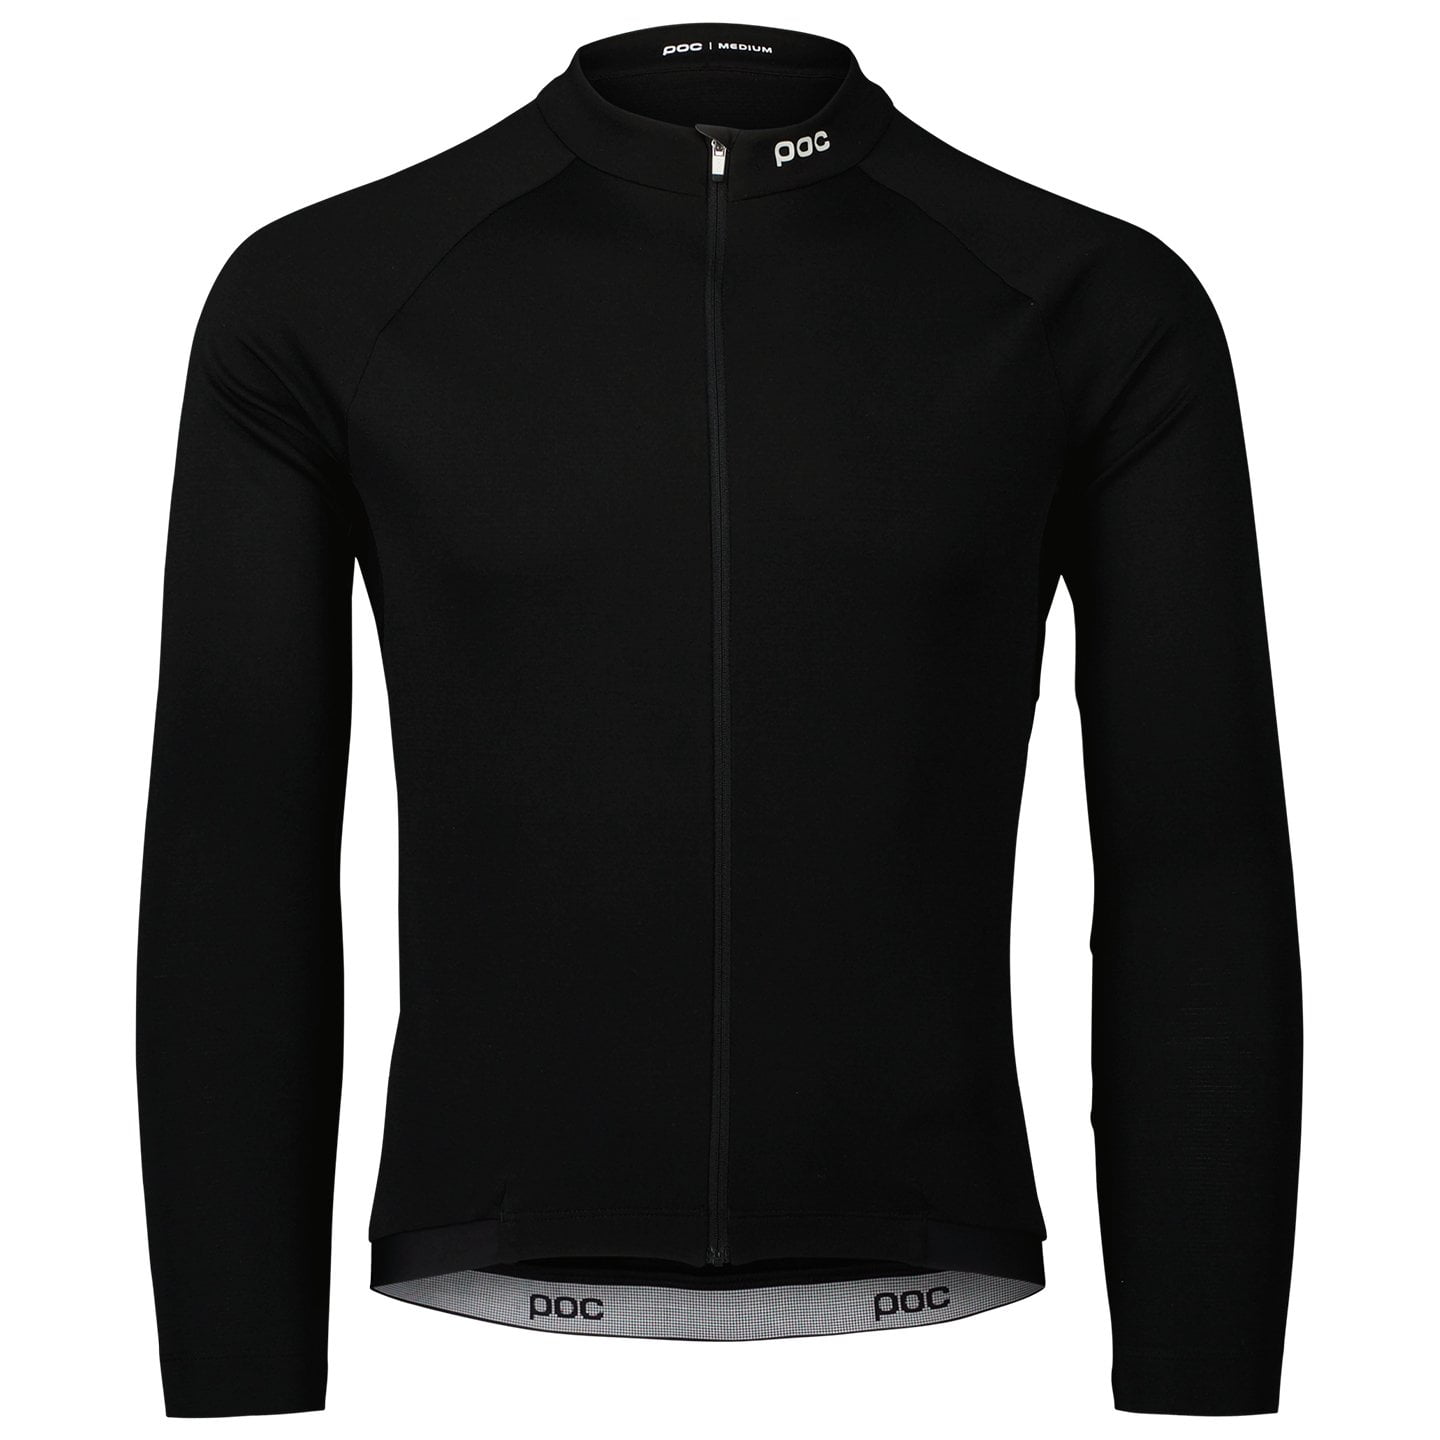 POC Thermal Lite Long Sleeve Jersey, for men, size L, Cycling jersey, Cycling clothing